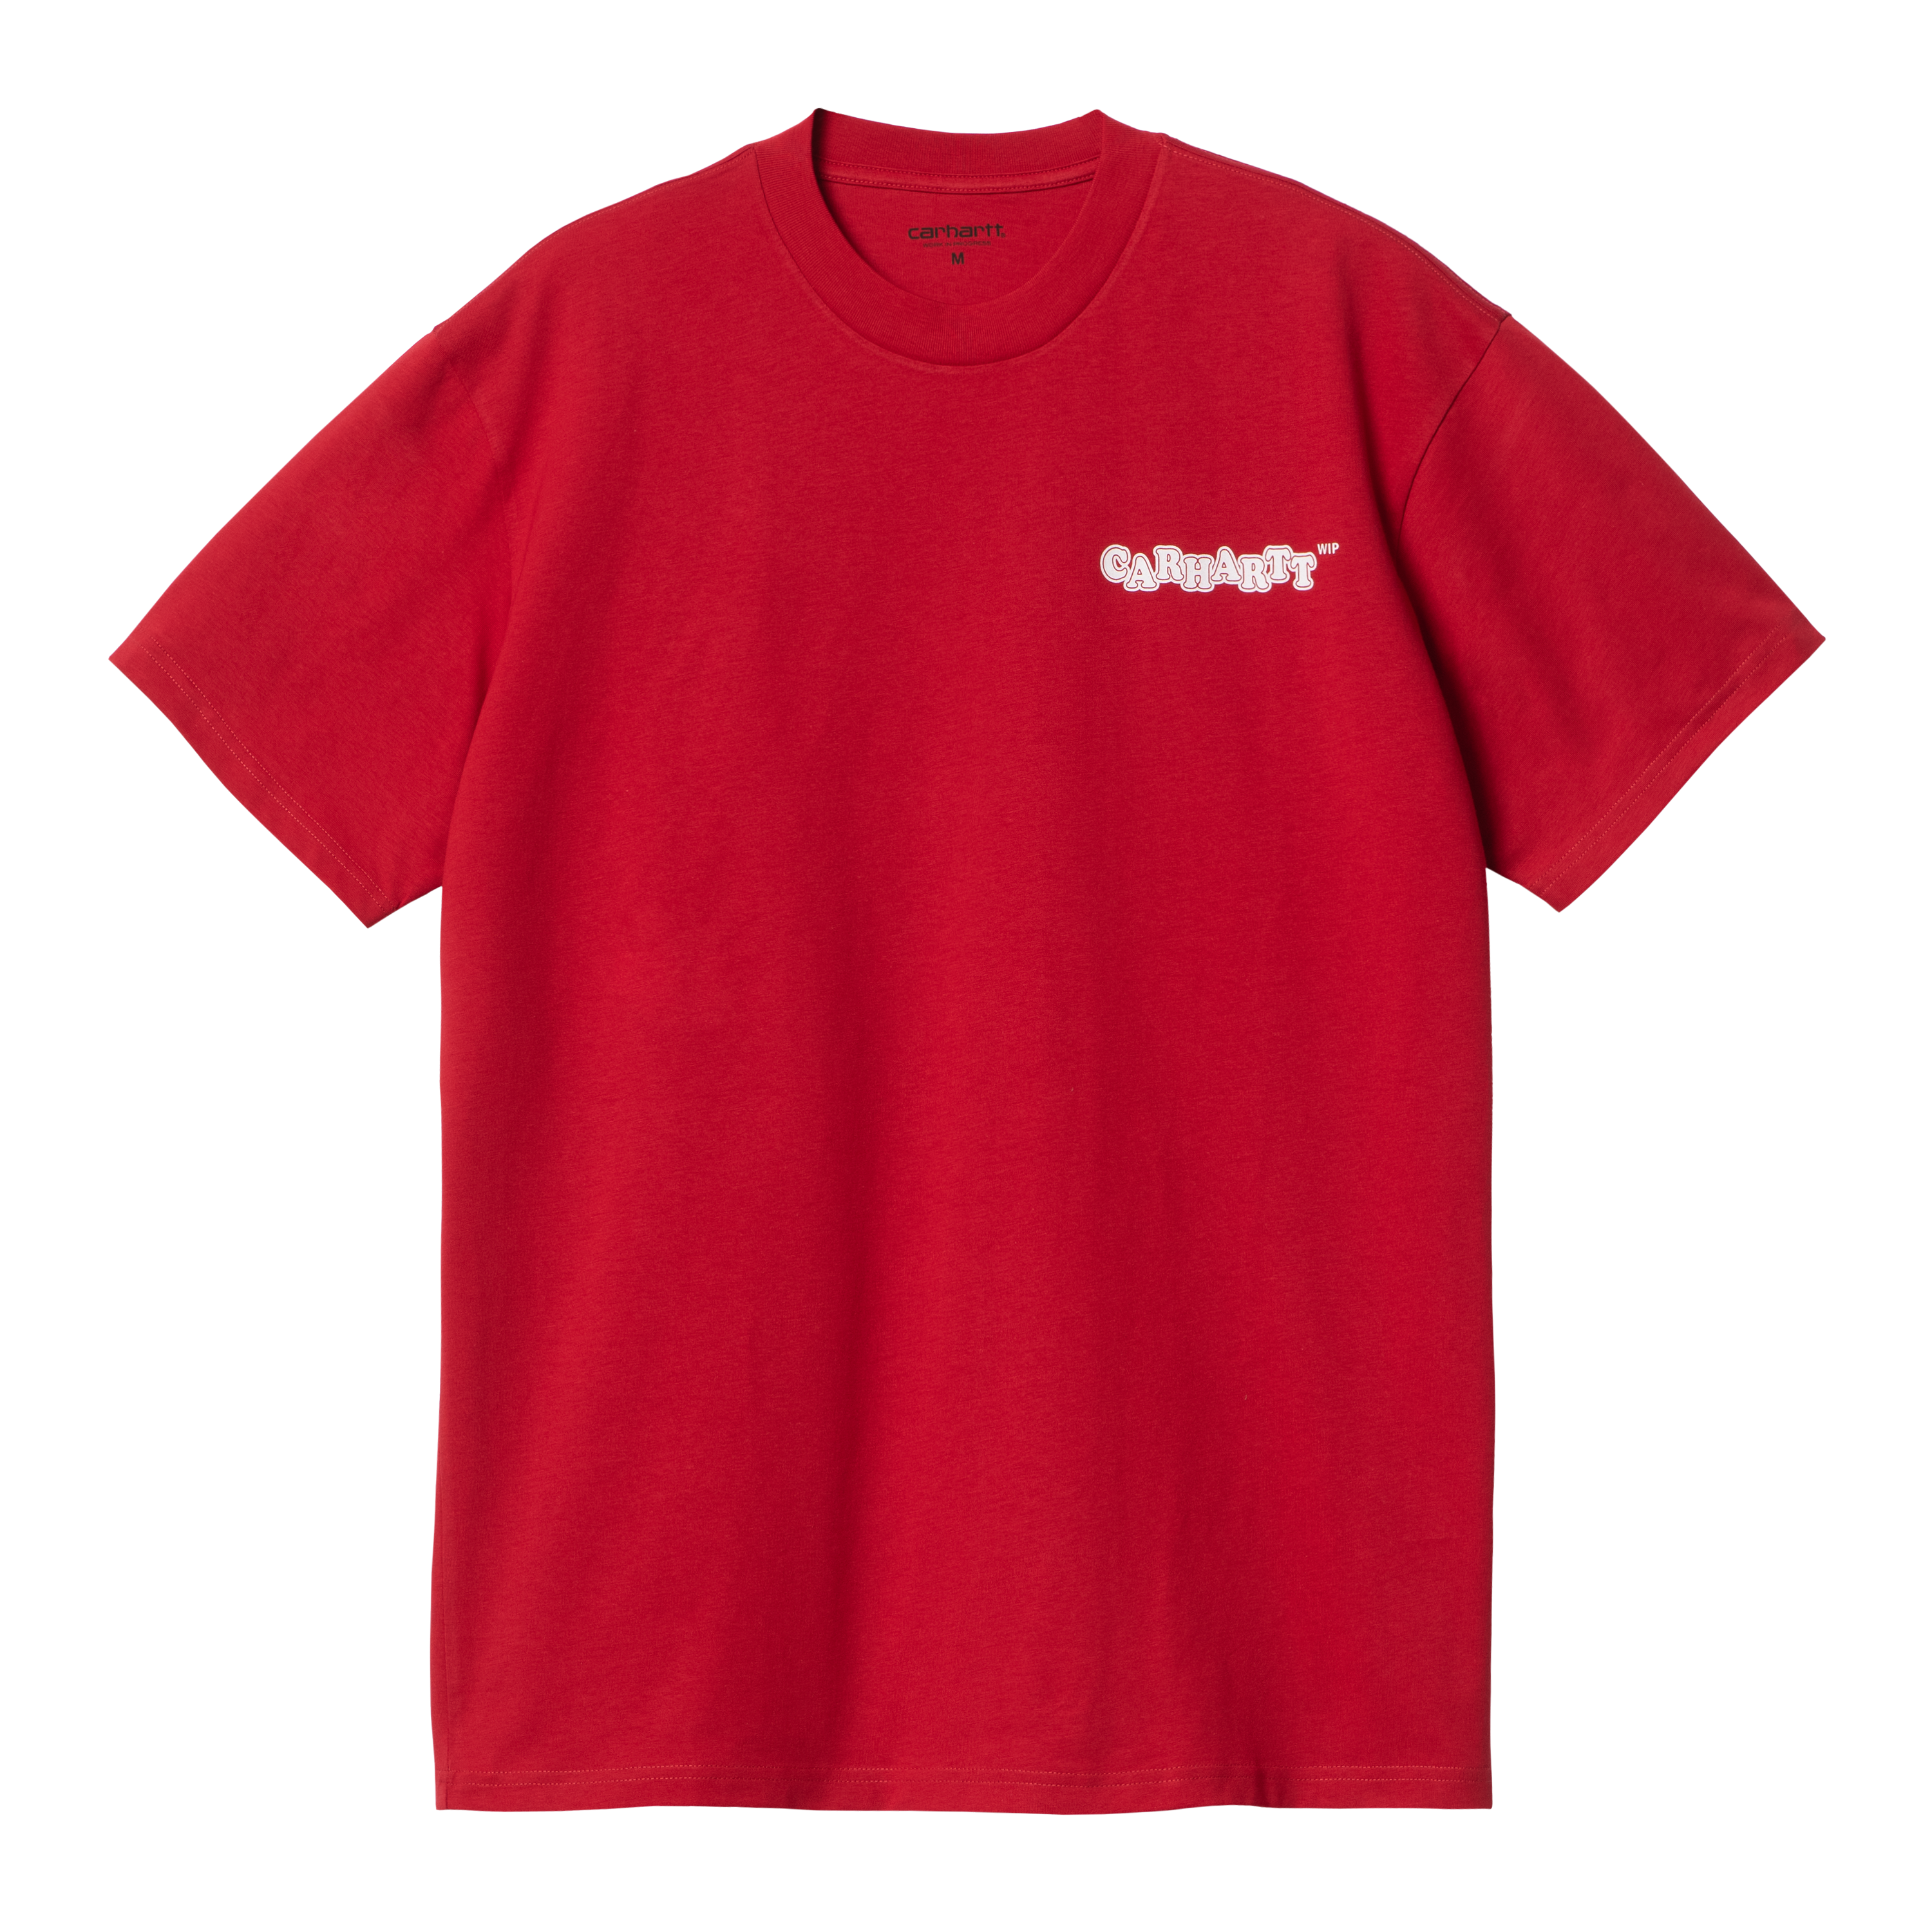 Carhartt WIP Short Sleeve Fast Food T-Shirt in Red